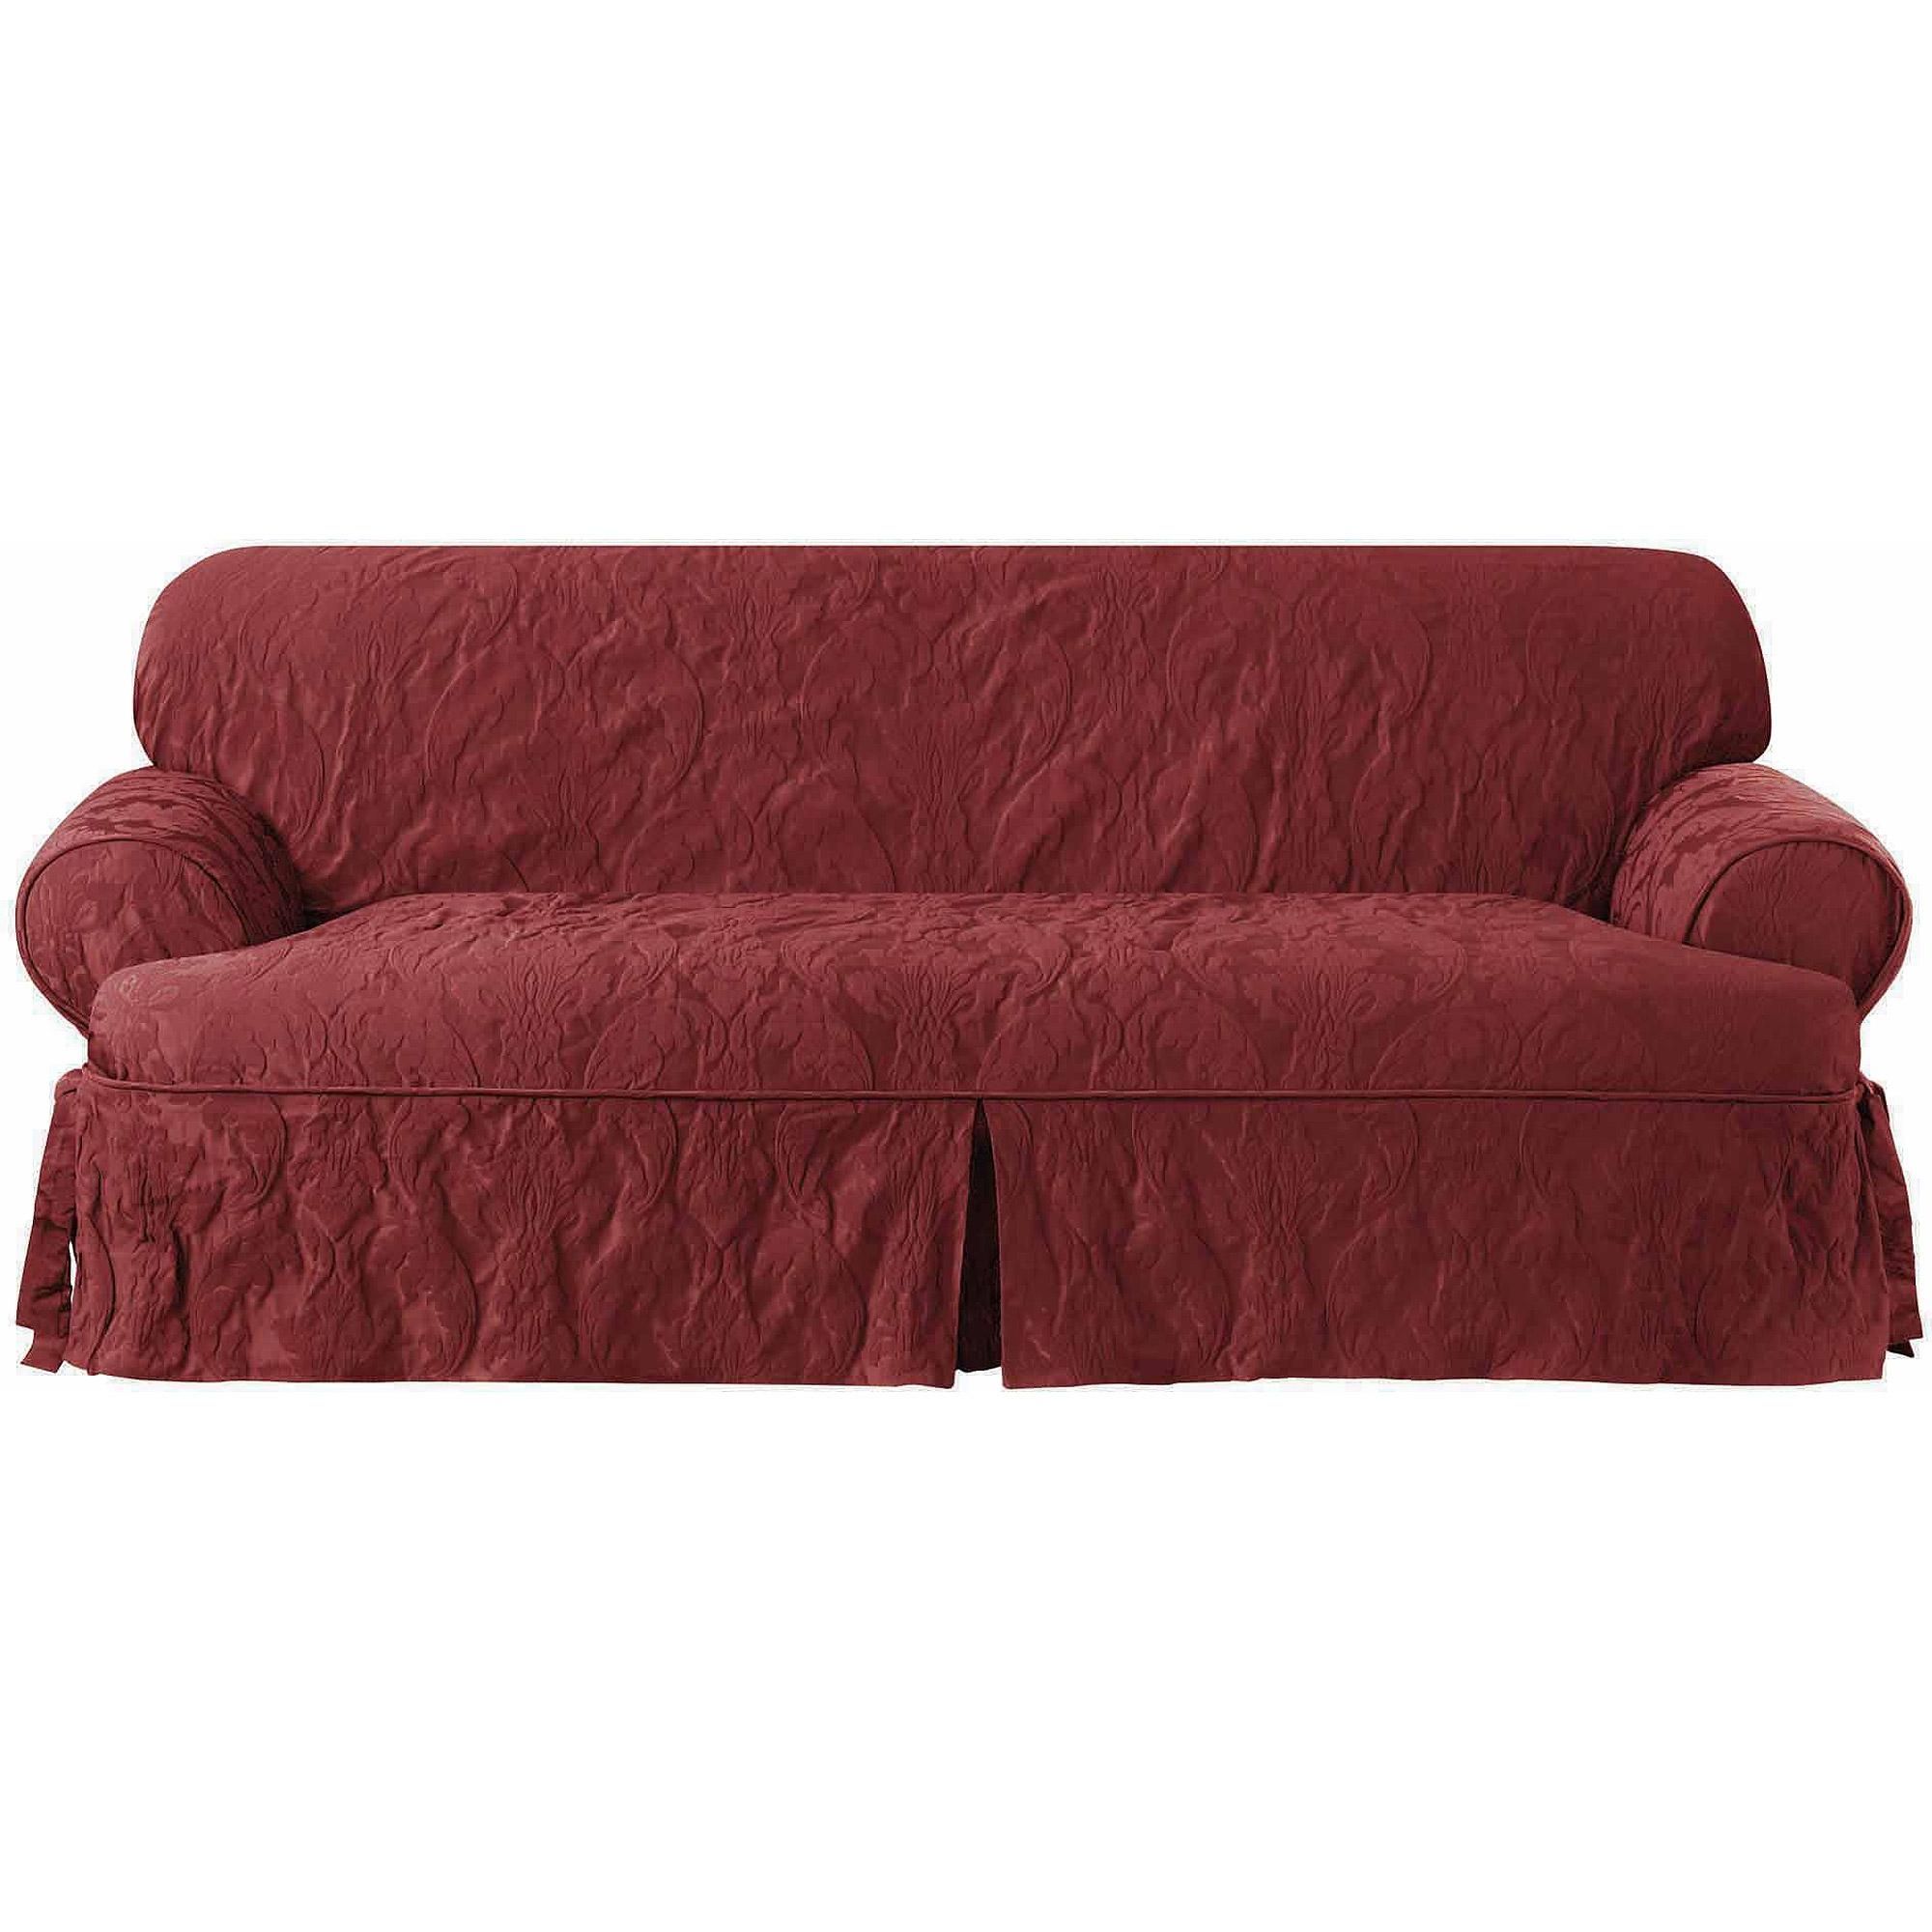 Furniture: Update Your Living Room With Best Sofa Slipcover Design In 3 Piece Sofa Covers (View 3 of 20)